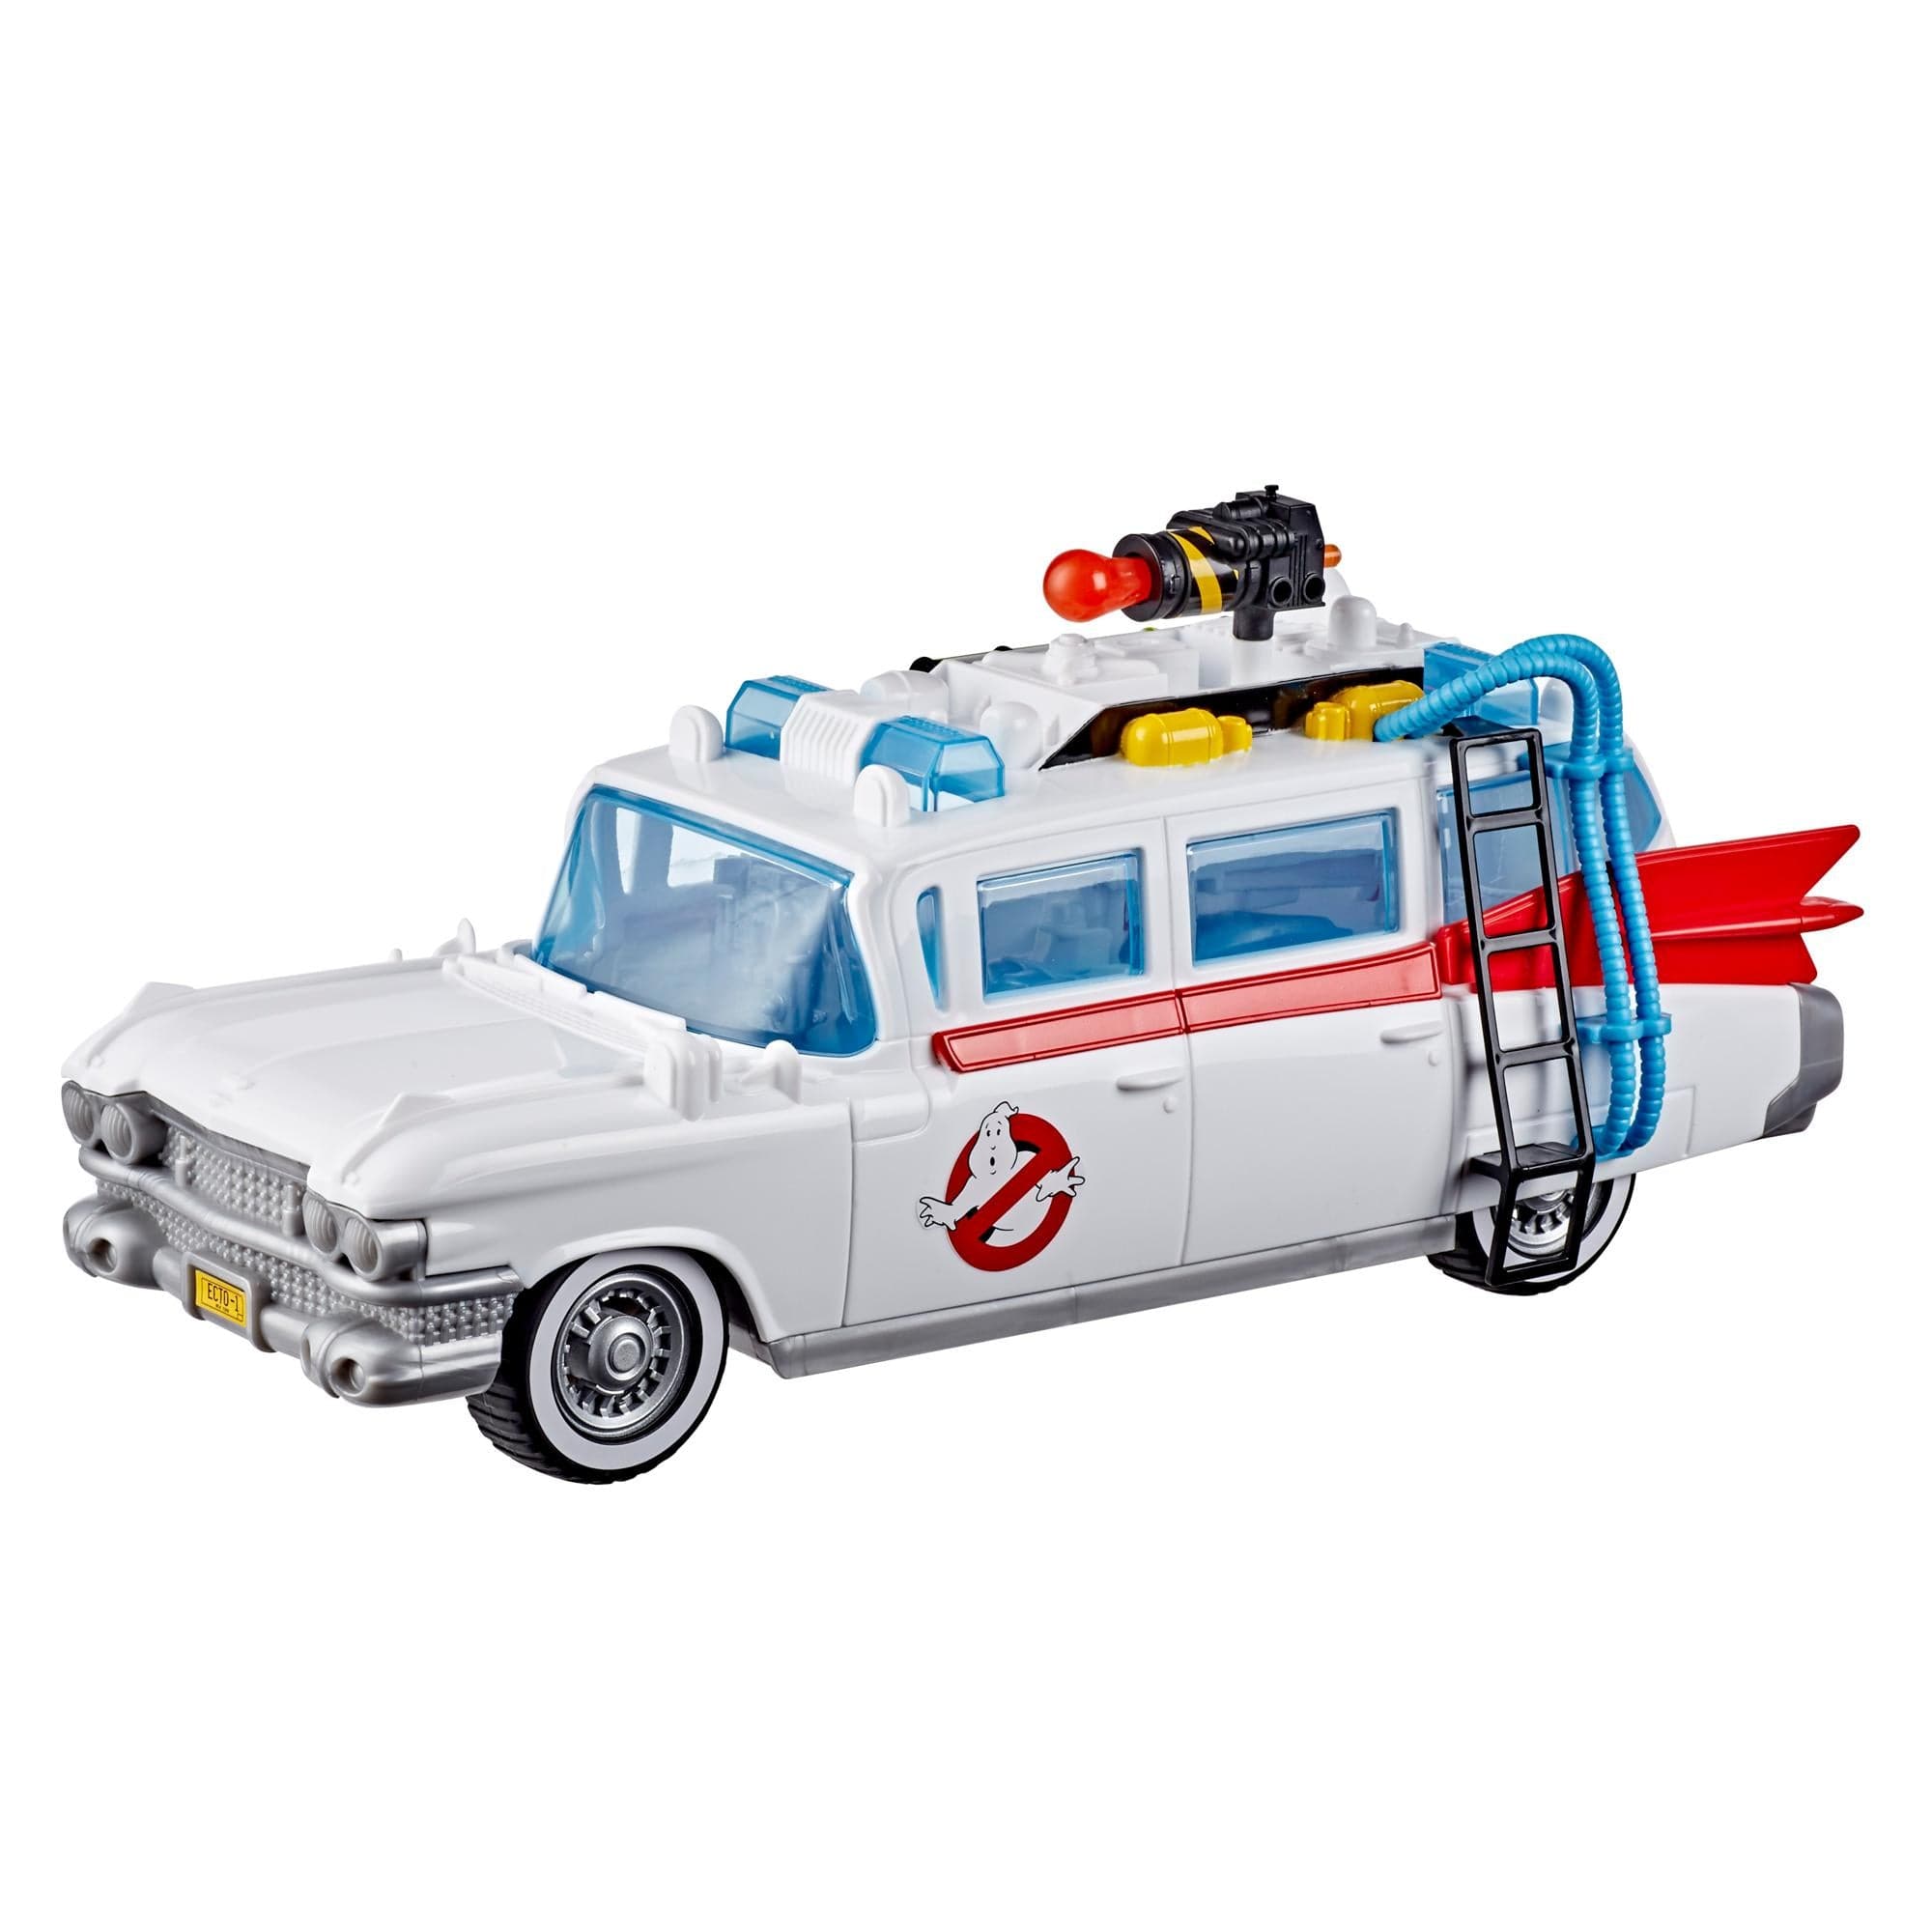 Hasbro-Ghostbusters Movie Ecto-1 Playset with Accessories-E9563-Legacy Toys